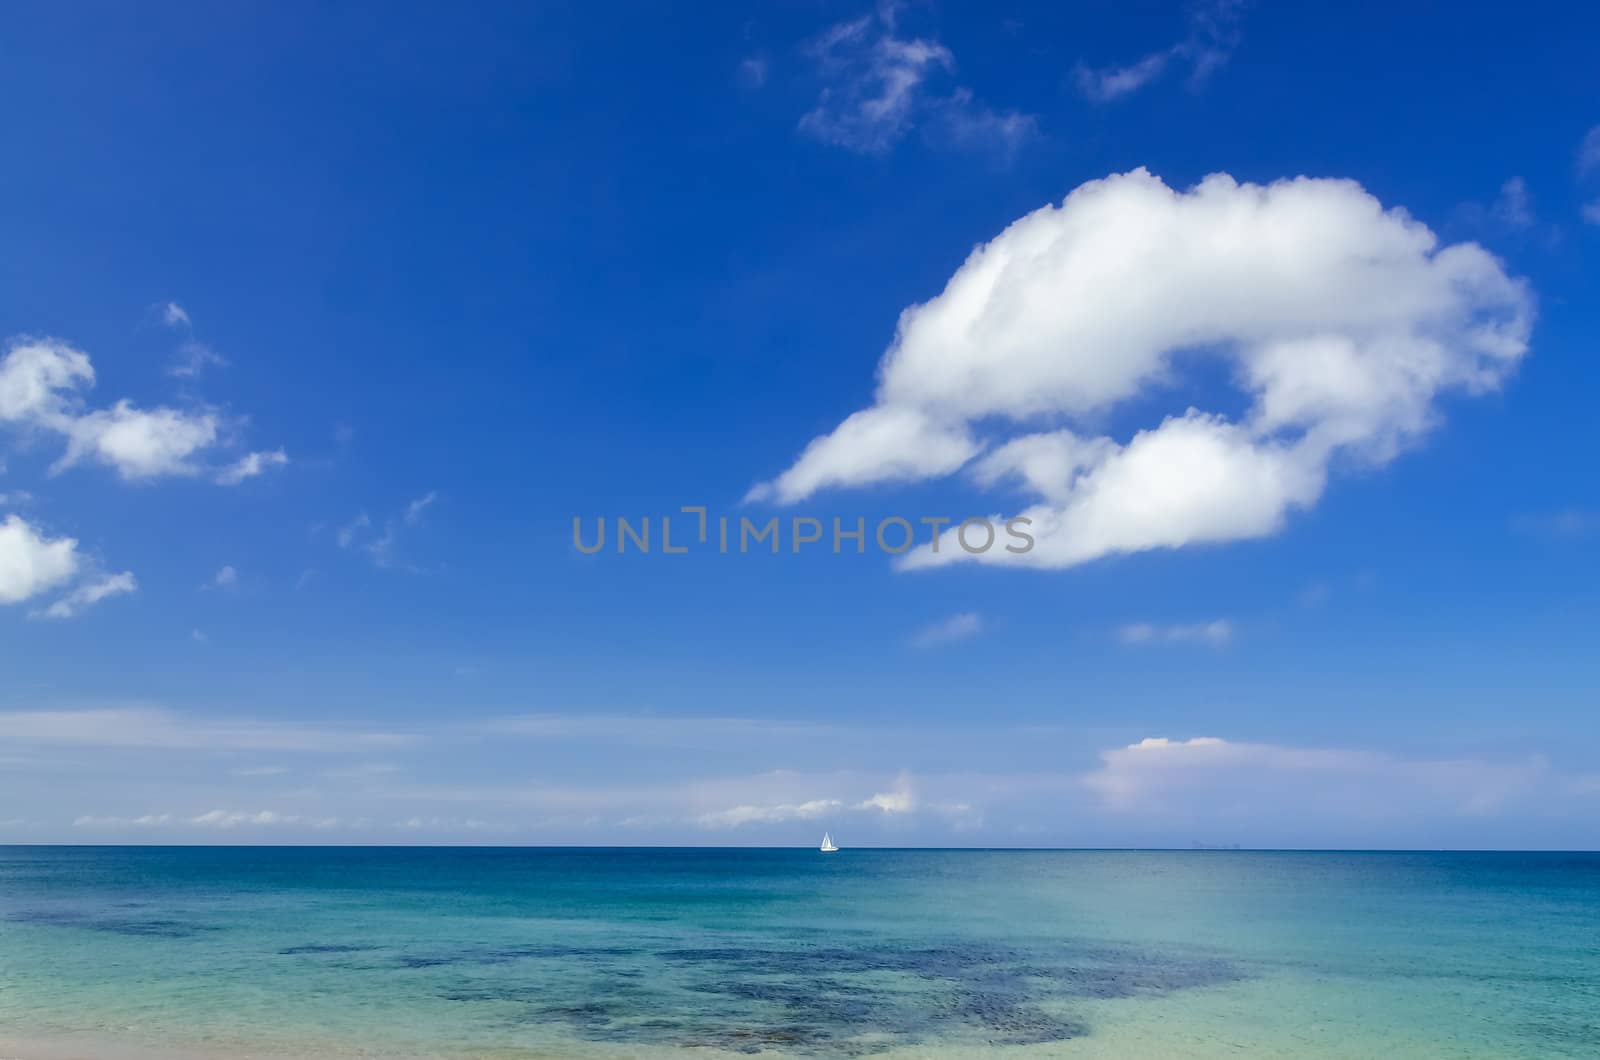 Ocean landscape with blue cloudy sky and sailboat by martinm303